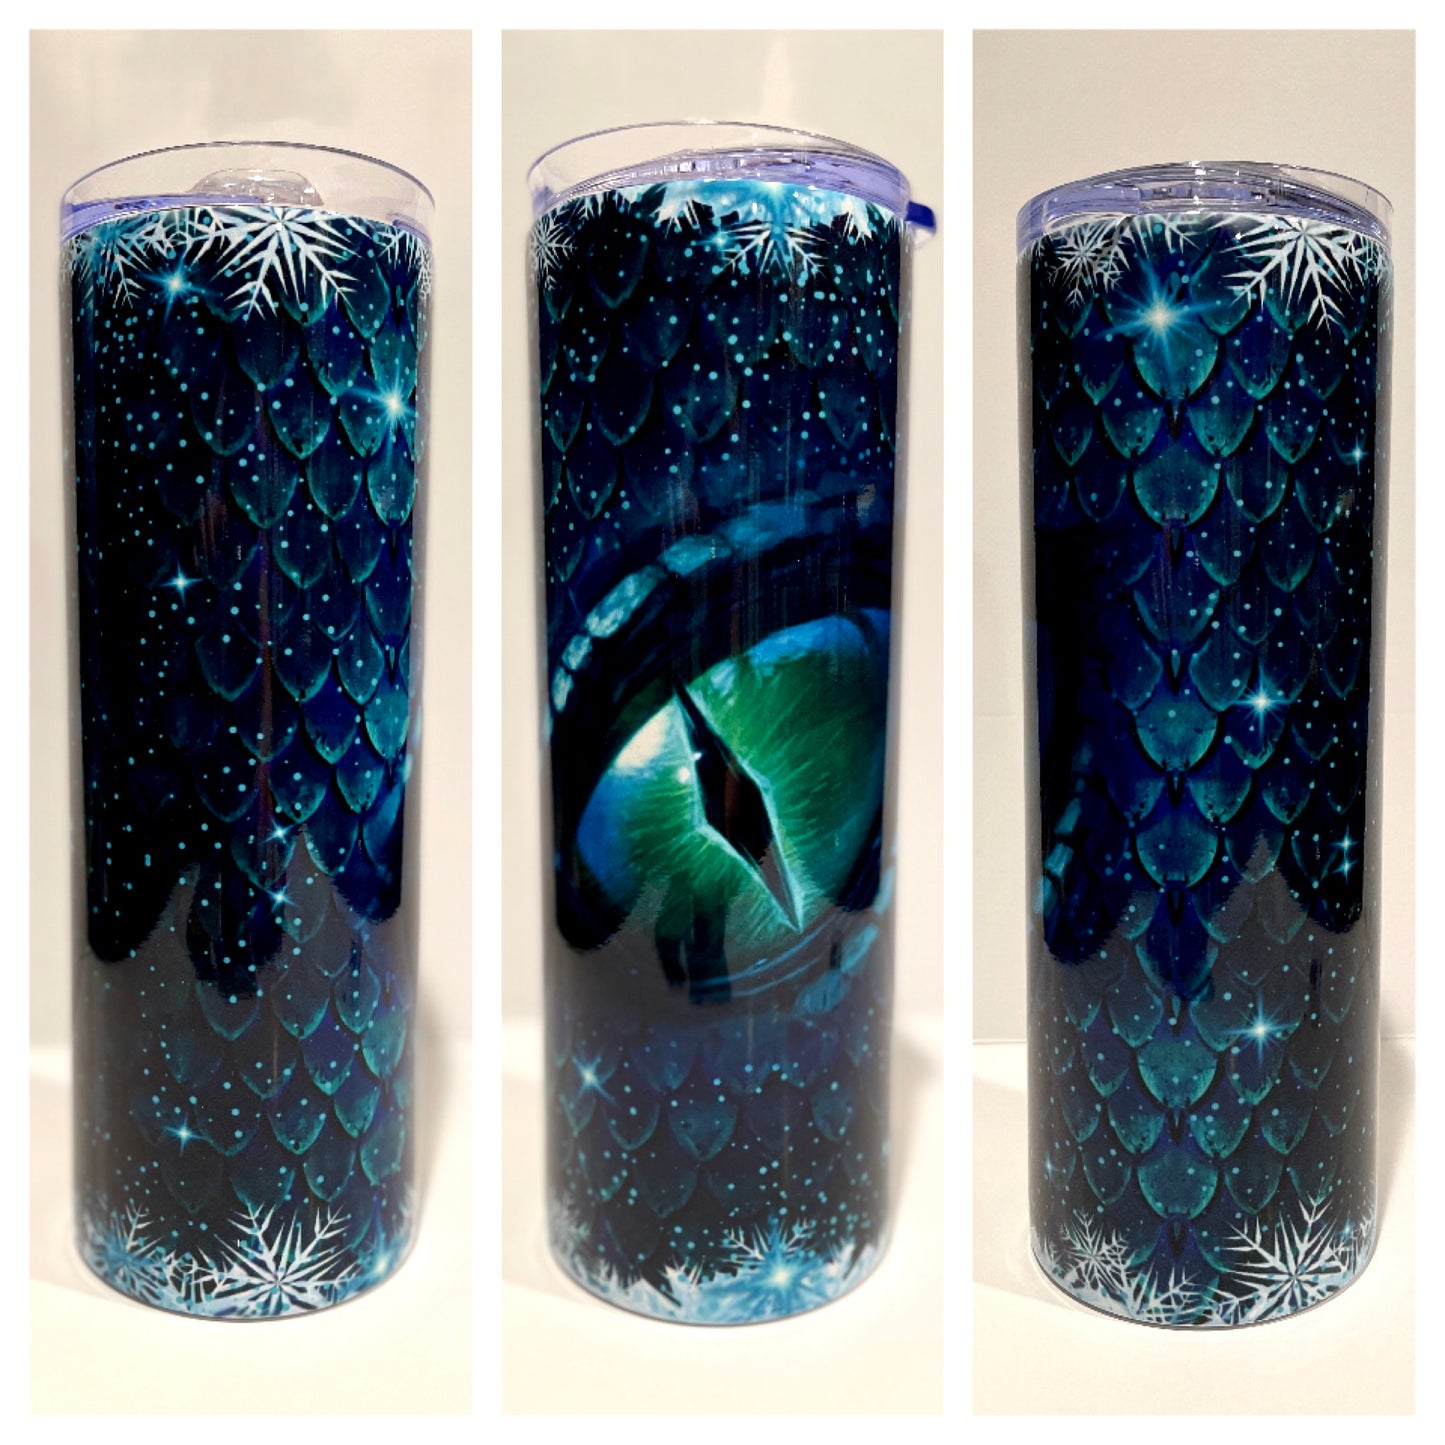 Icy Dragon 20oz Skinny Stainless Steel Sublimation Tumbler